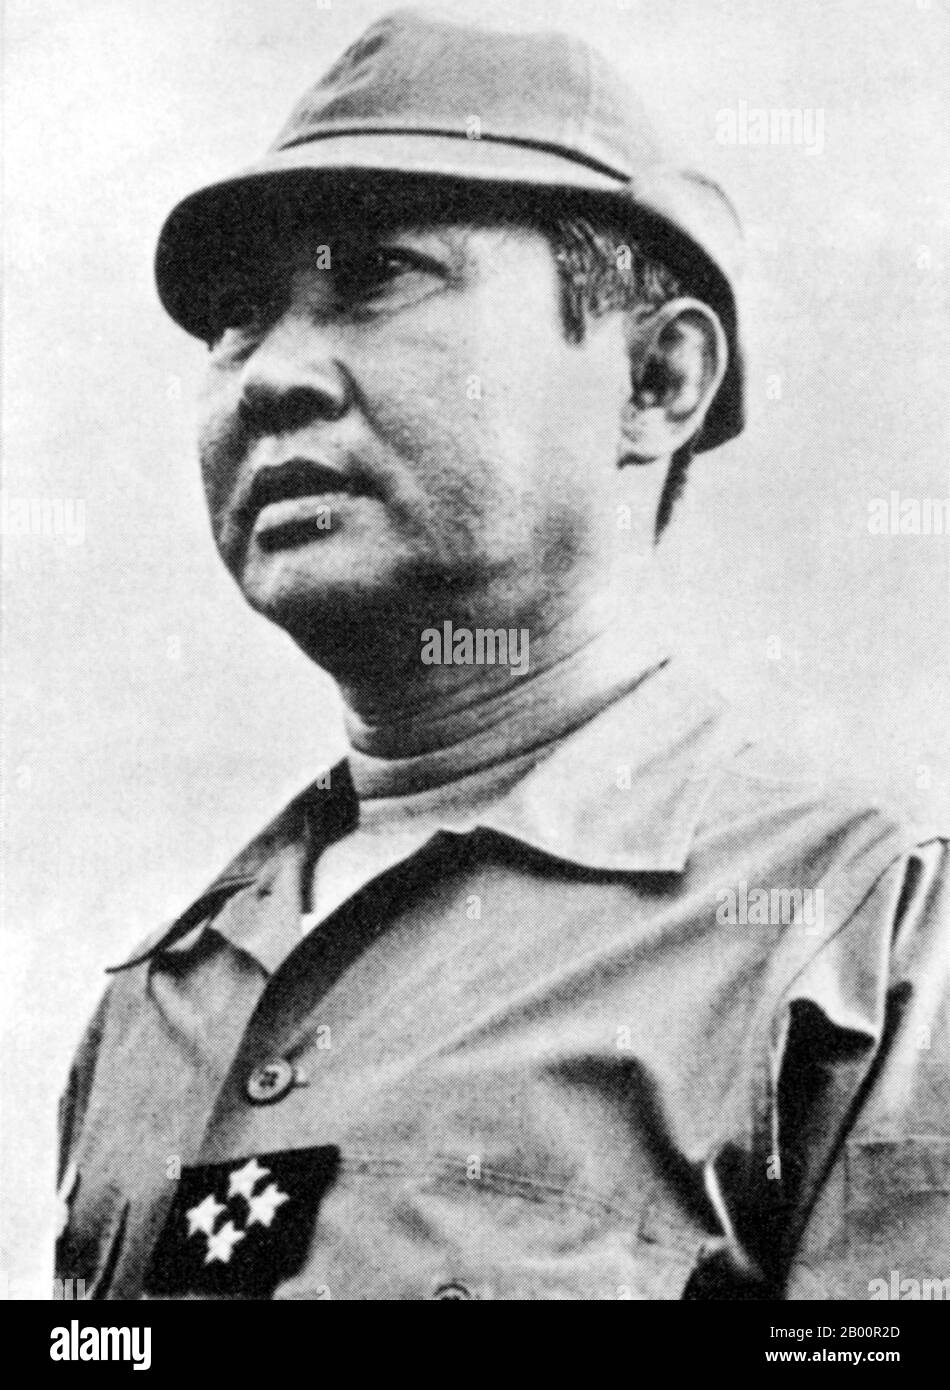 Cambodia: General Lon Nol led a military coup against Prince Norodom Sihanouk and became President of the Khmer Republic (1970-1975).  Lon Nol ( November 13, 1913 – November 17, 1985) was a Cambodian politician and soldier who served as Prime Minister of Cambodia twice, as well as serving repeatedly as Defense Minister. He led a military coup against Prince Norodom Sihanouk and became President of the Khmer Republic. Lon Nol fled Cambodiain April, 1975, first settling in Hawaii and then in Fullerton, California. He died on November 17, 1985. Stock Photo